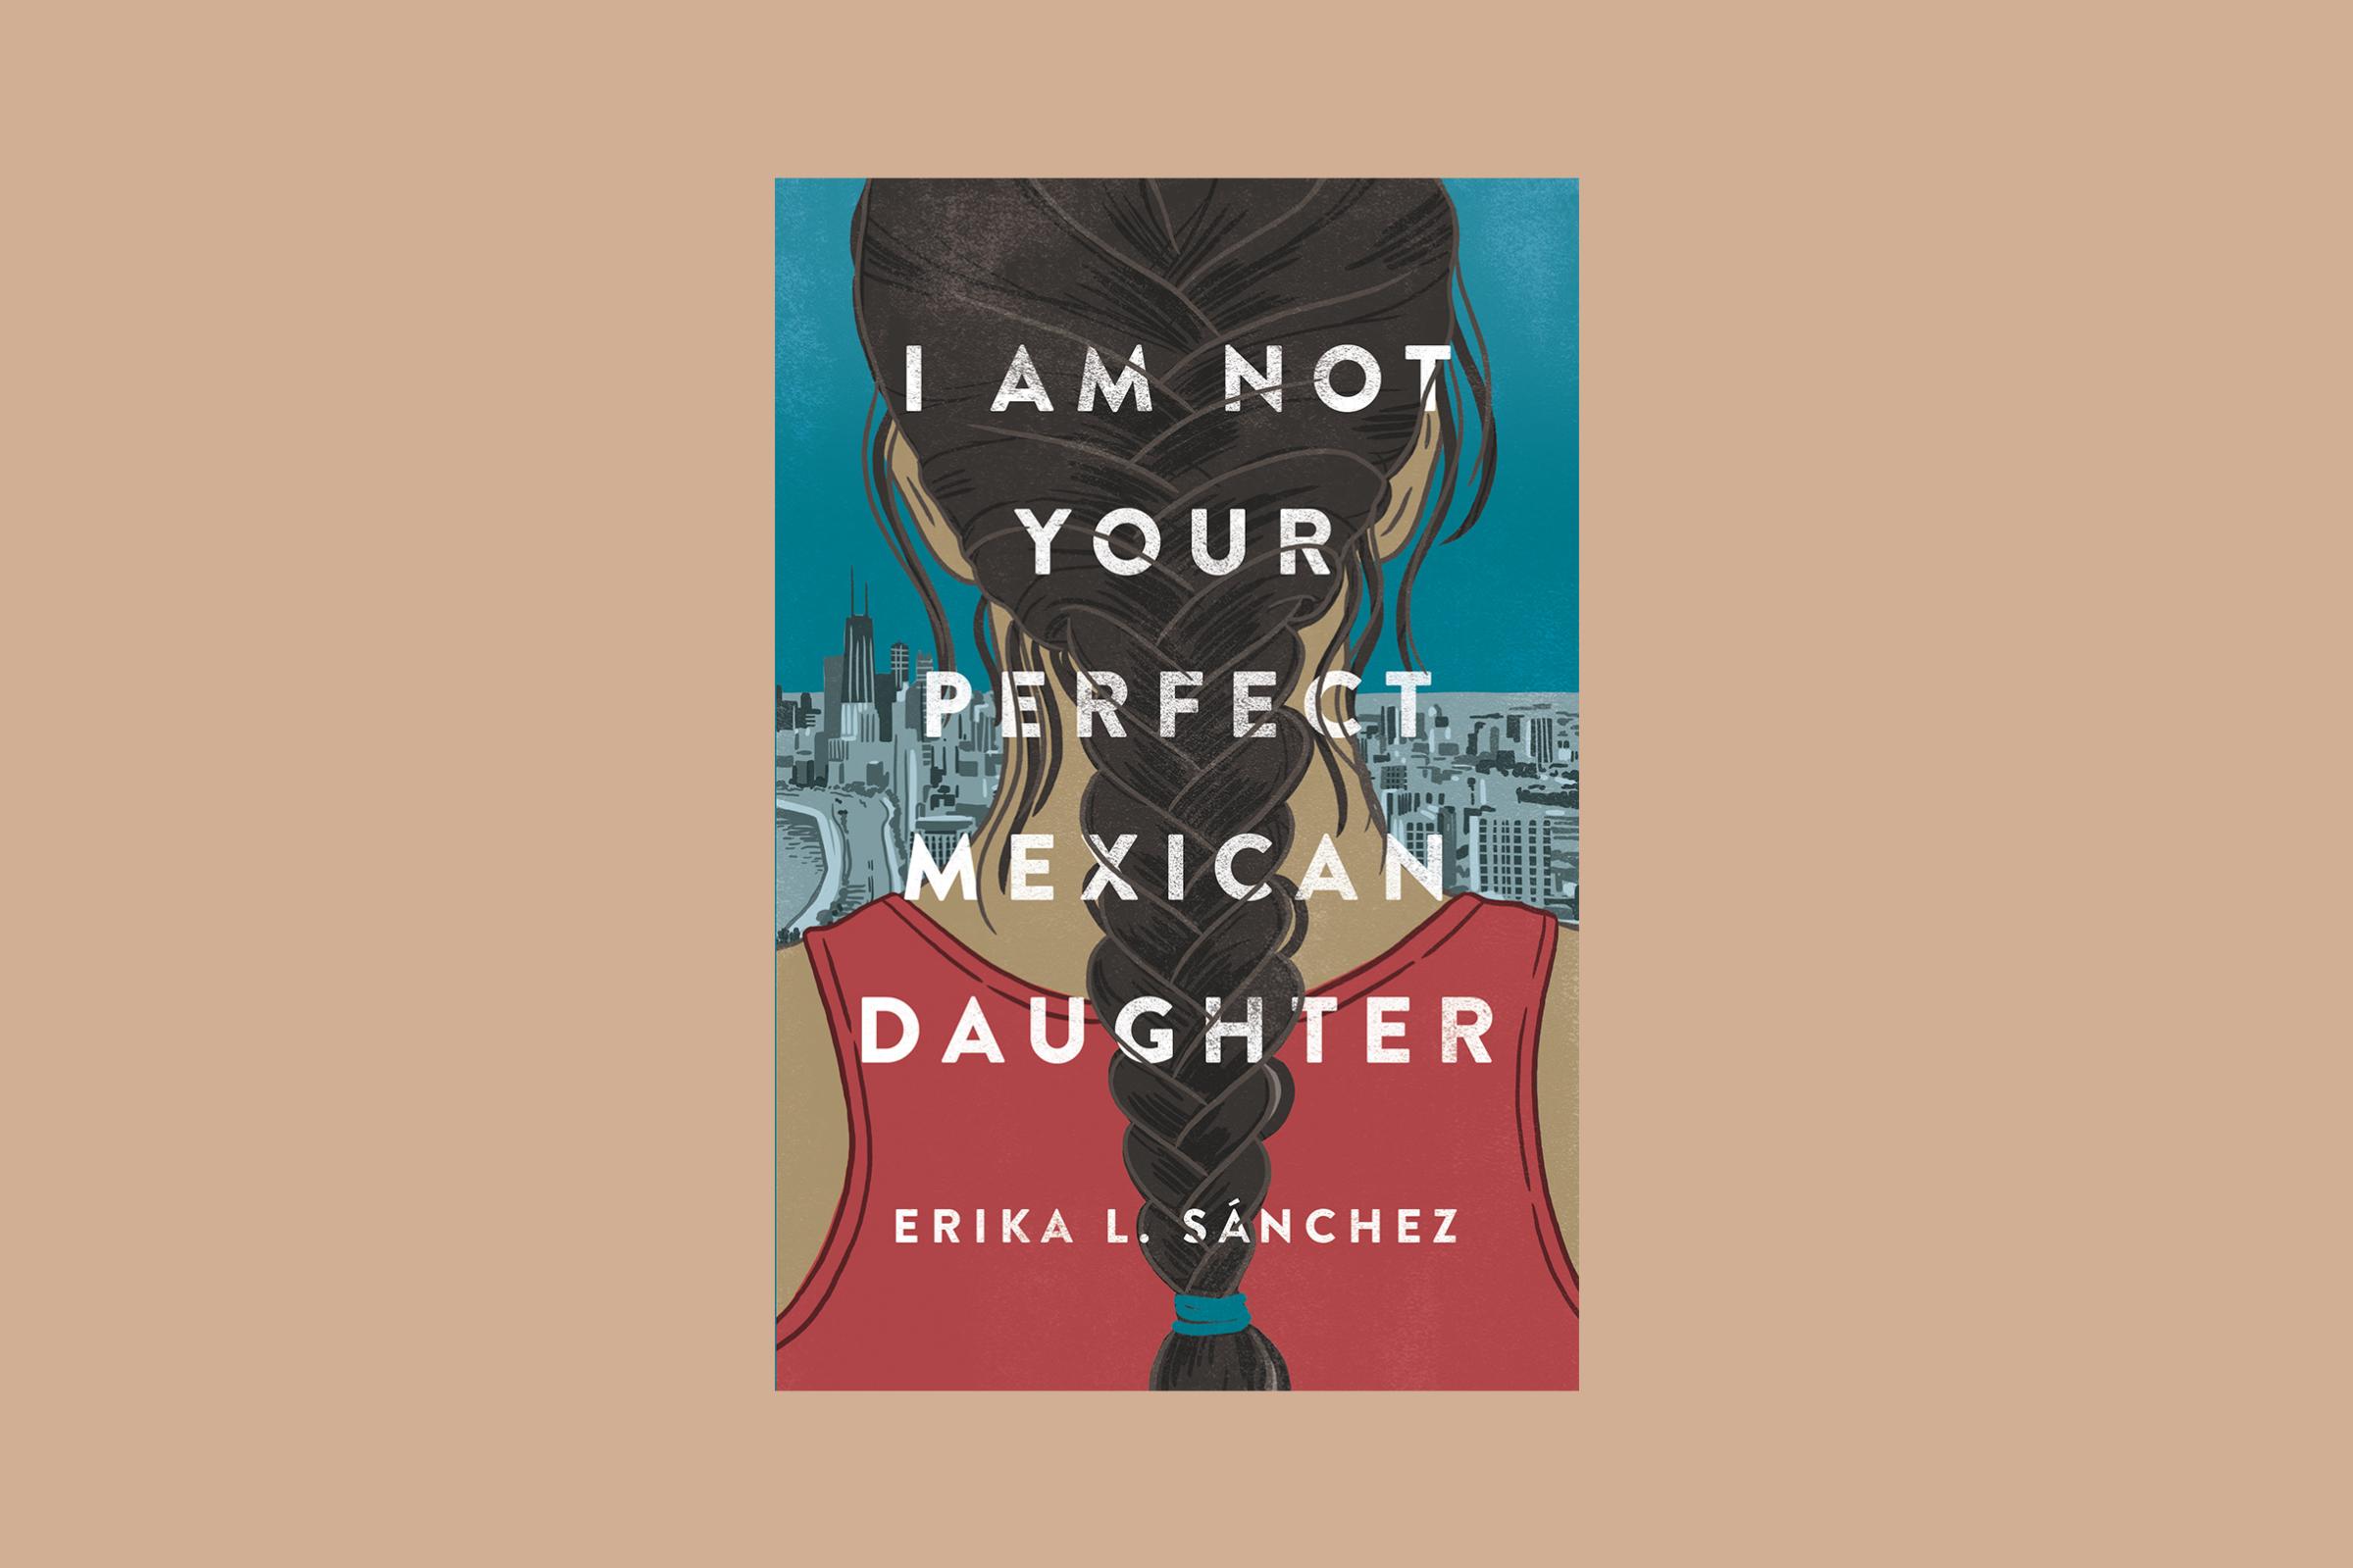 I Am Not Your Perfect Mexican Daughter is one of the 10 best young adult books of 2017